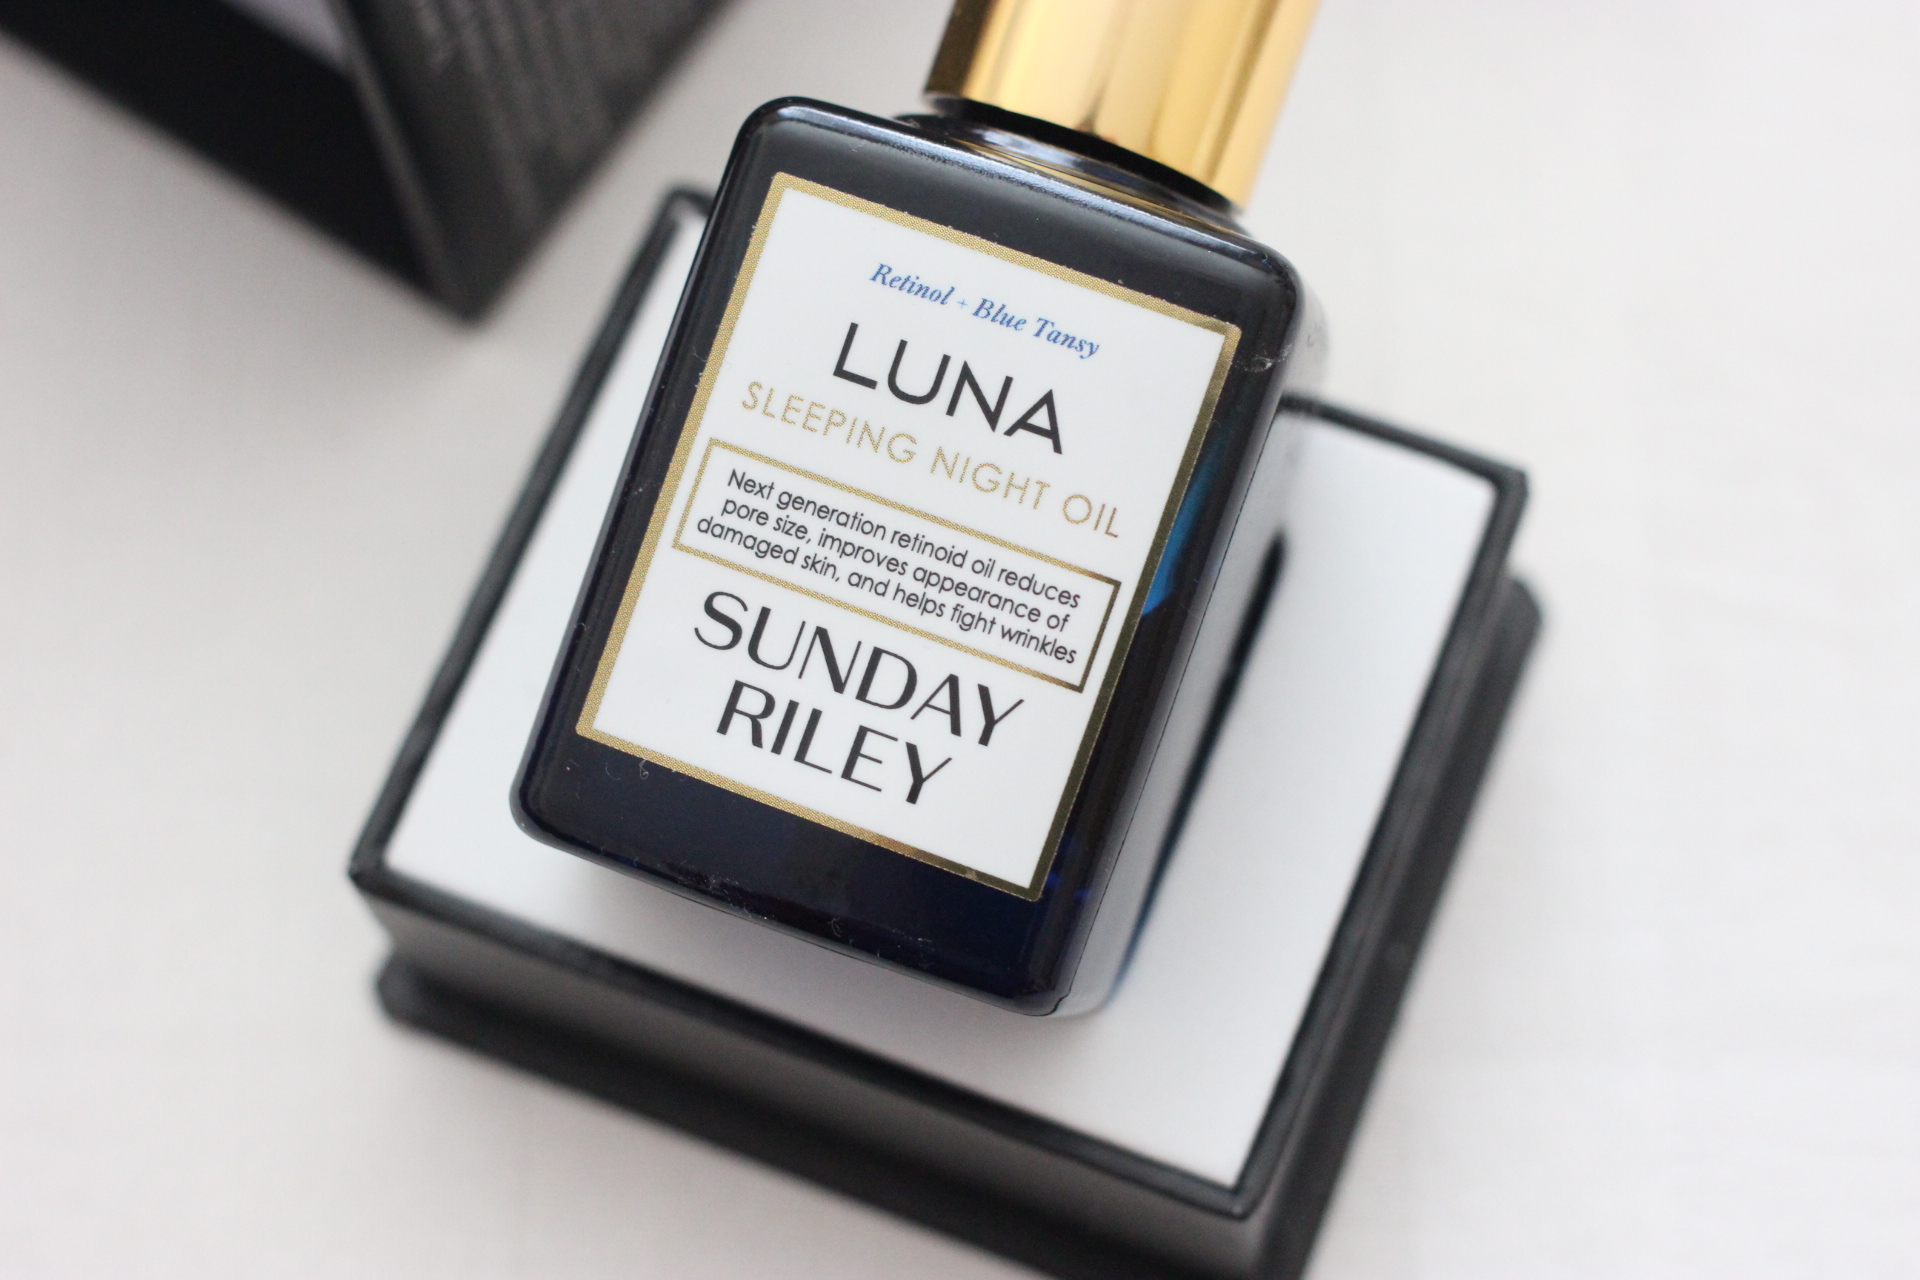 Sunday Riley Luna Oil review